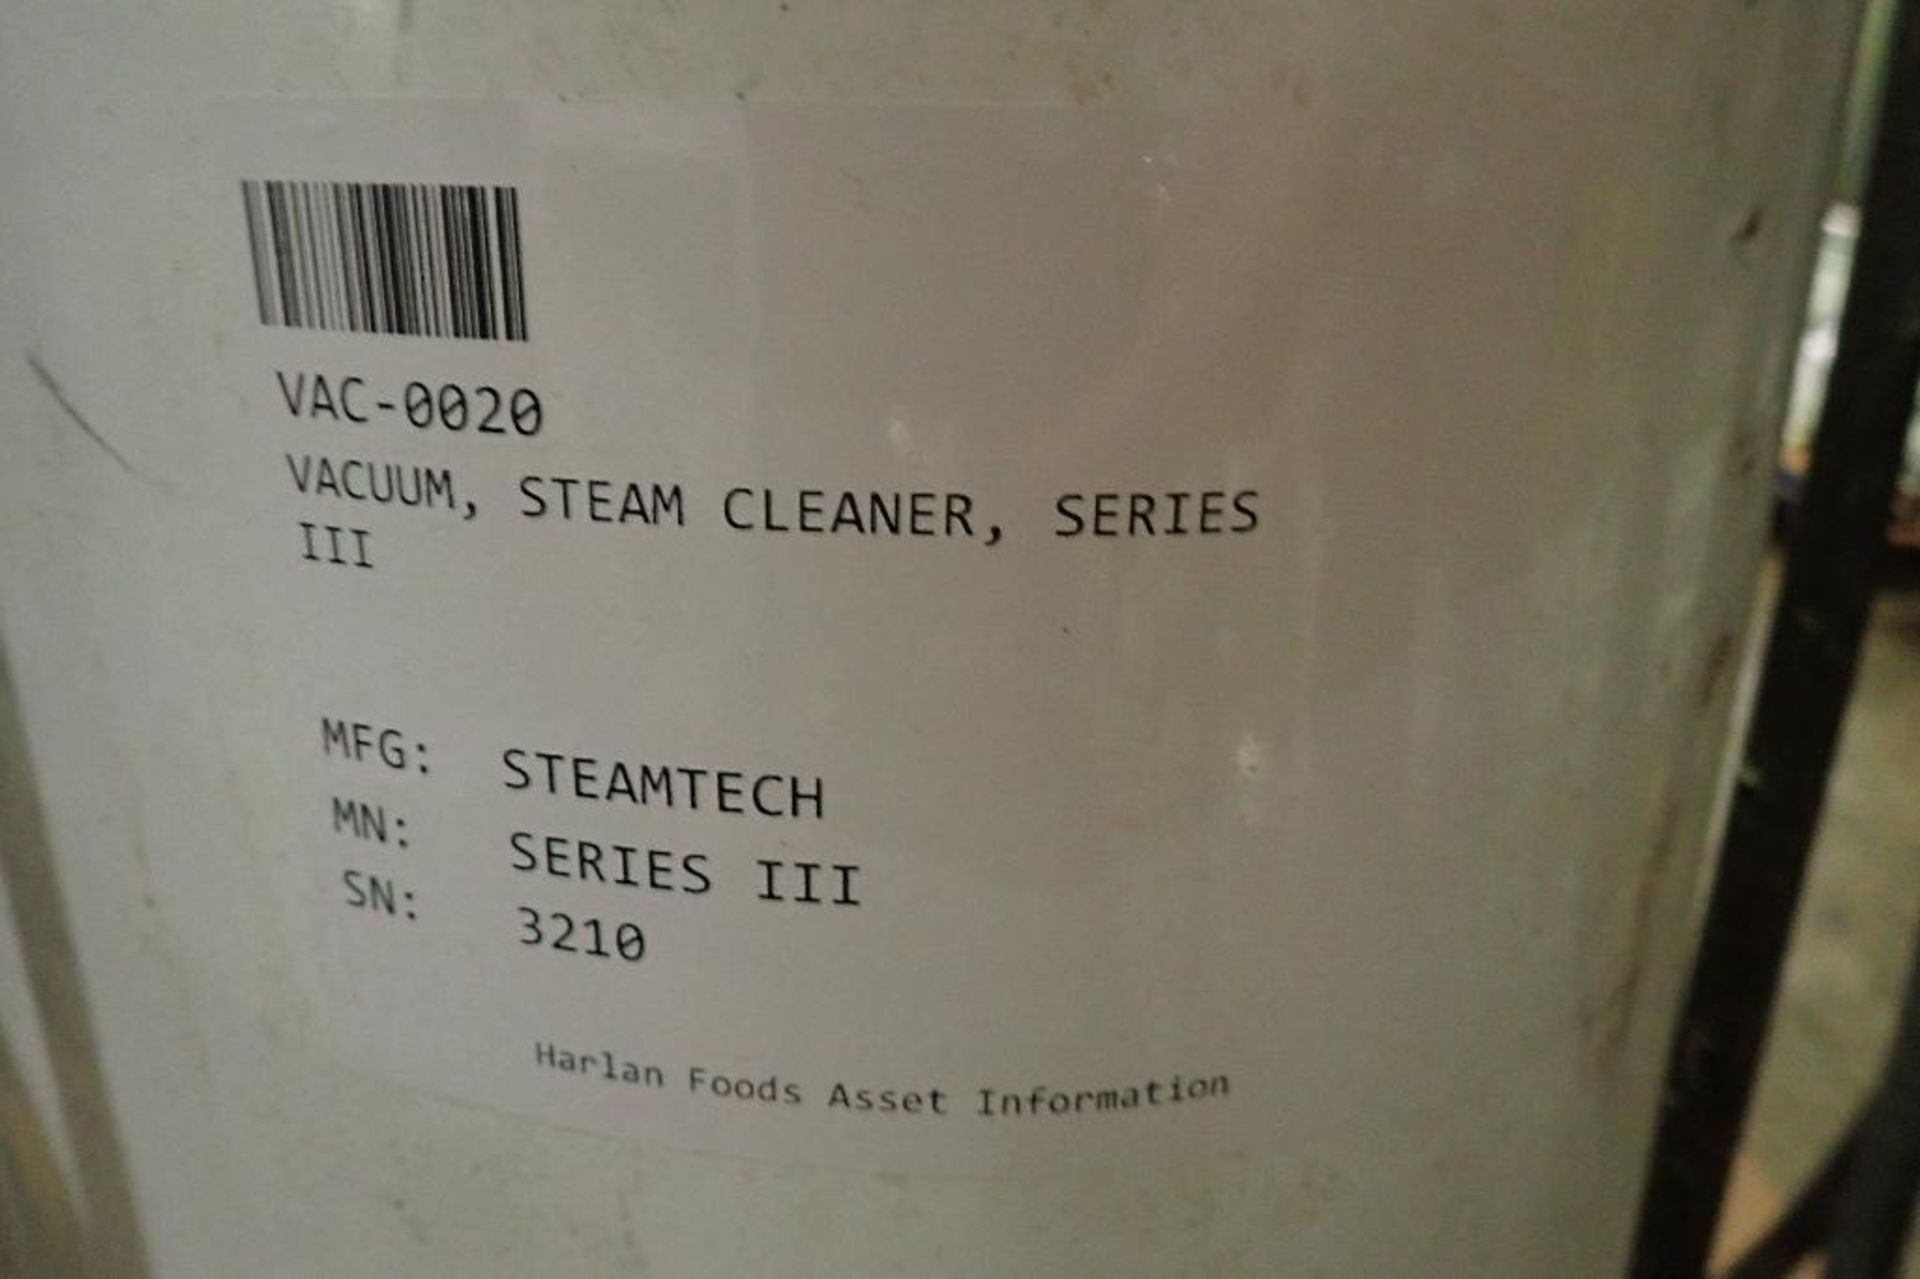 Steamtech series III hot water pressure washer, SN 6210, lp gas **Rigging FEE: $50 ** - Image 8 of 8